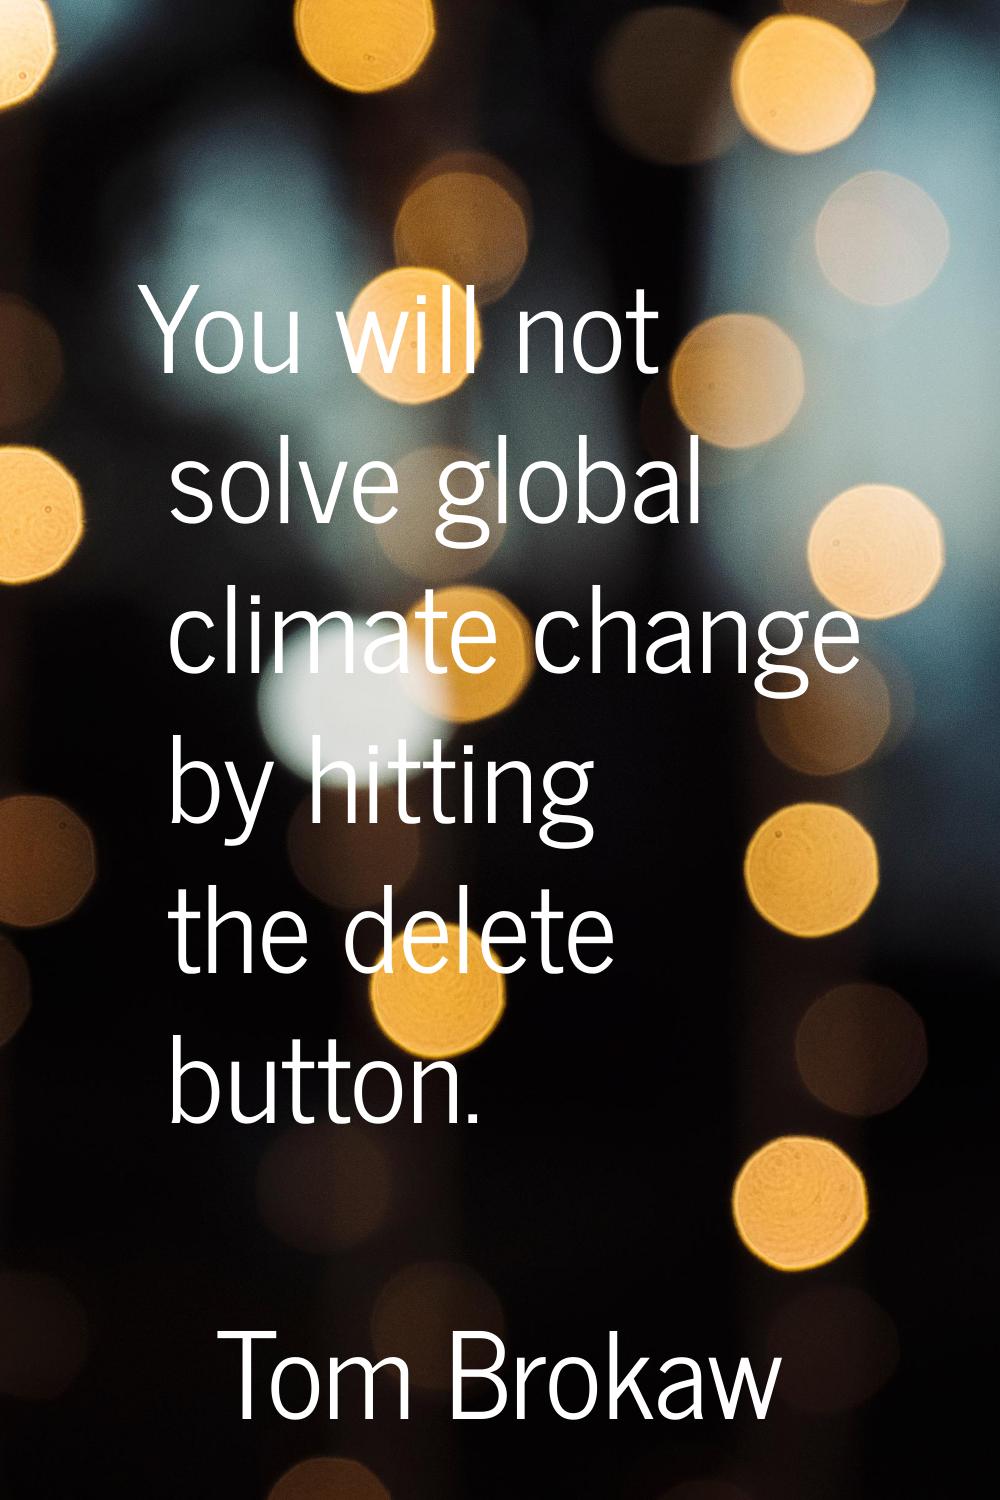 You will not solve global climate change by hitting the delete button.